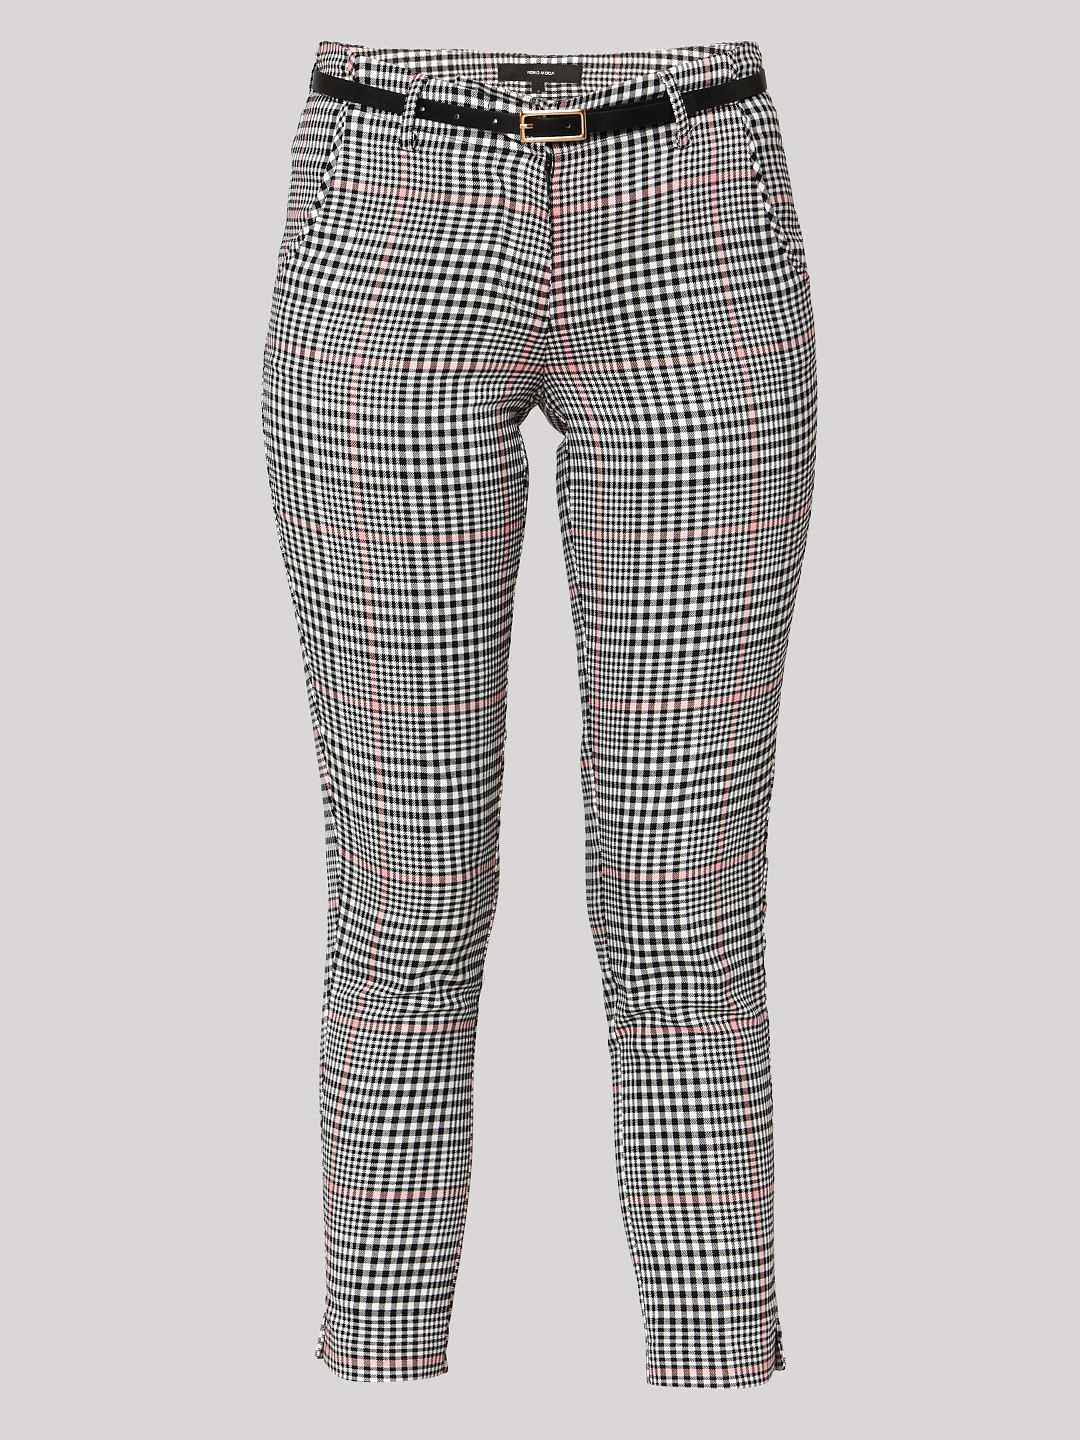 Black and White Gingham Pants  Trouser Pants  High Waisted Pant  Lulus